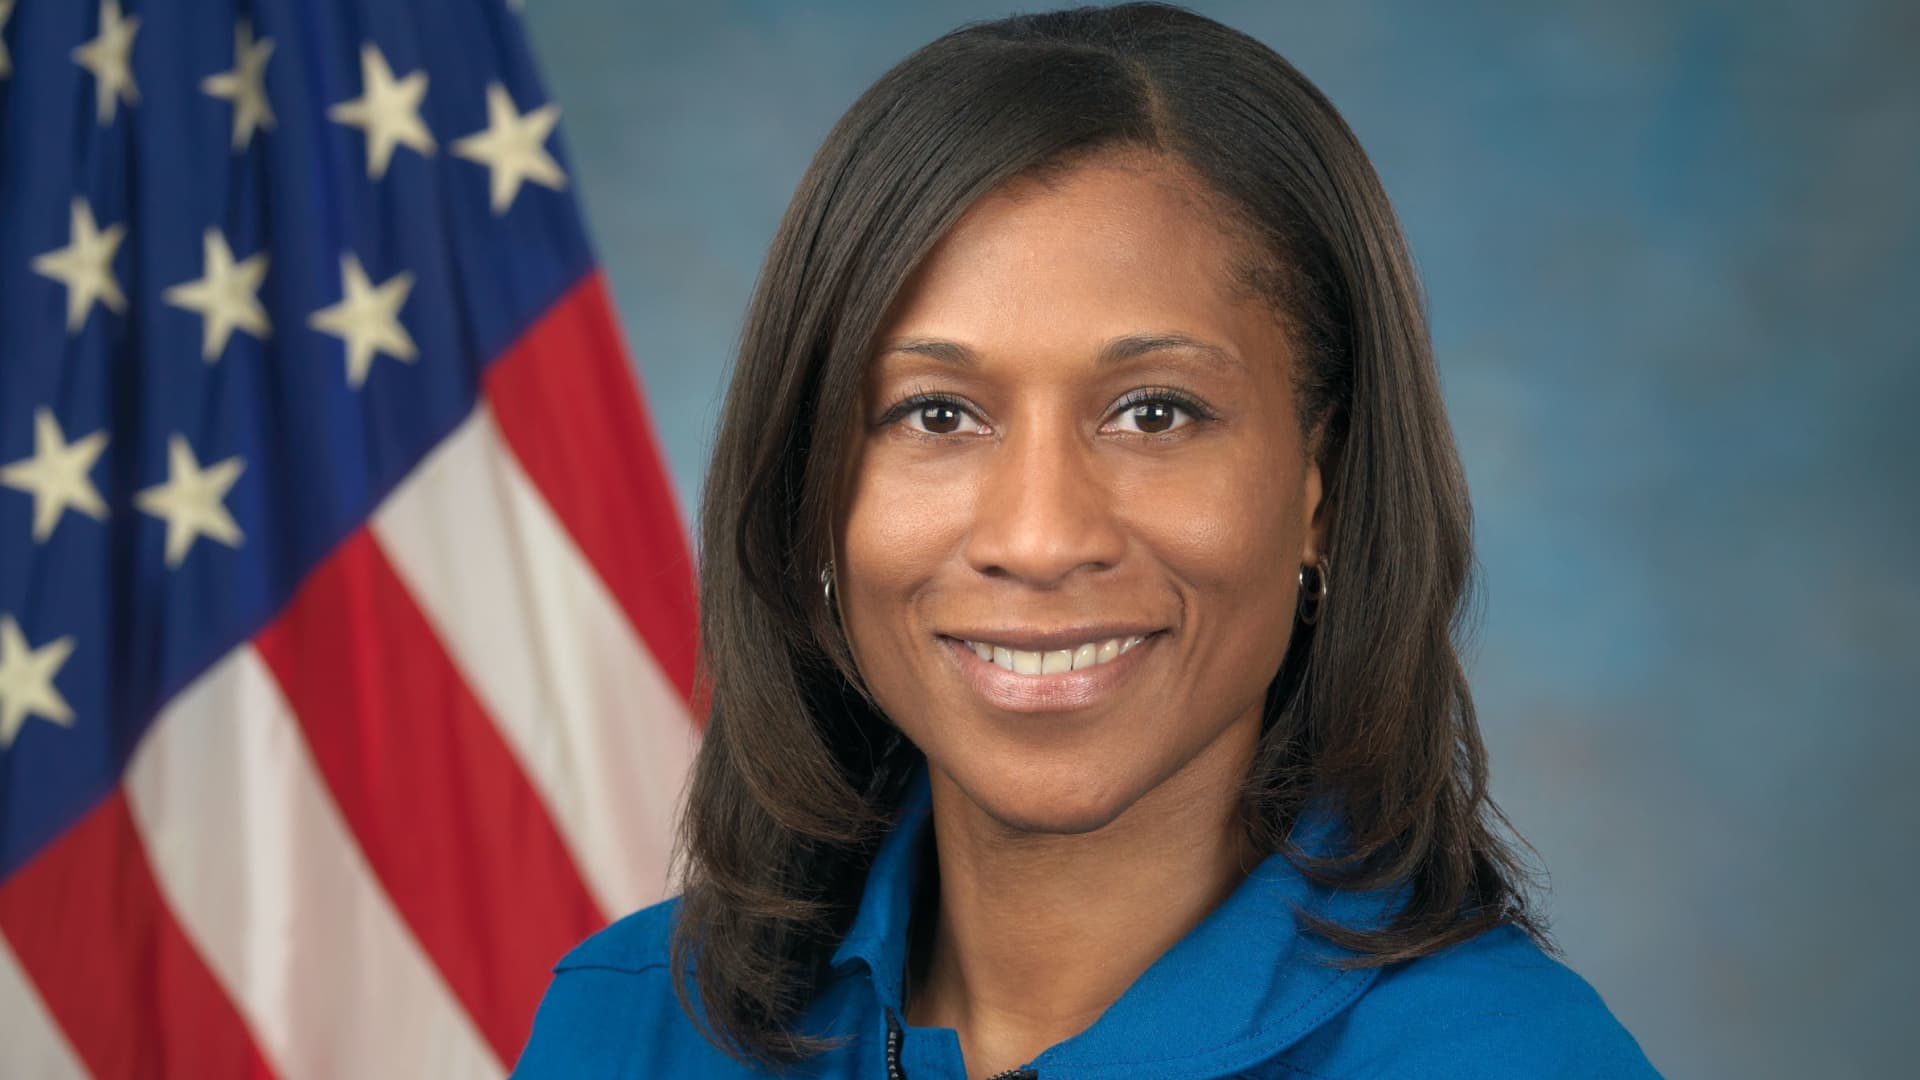 NASA astronaut Jeanette Epps to become first Black woman to join an International Space Station crew